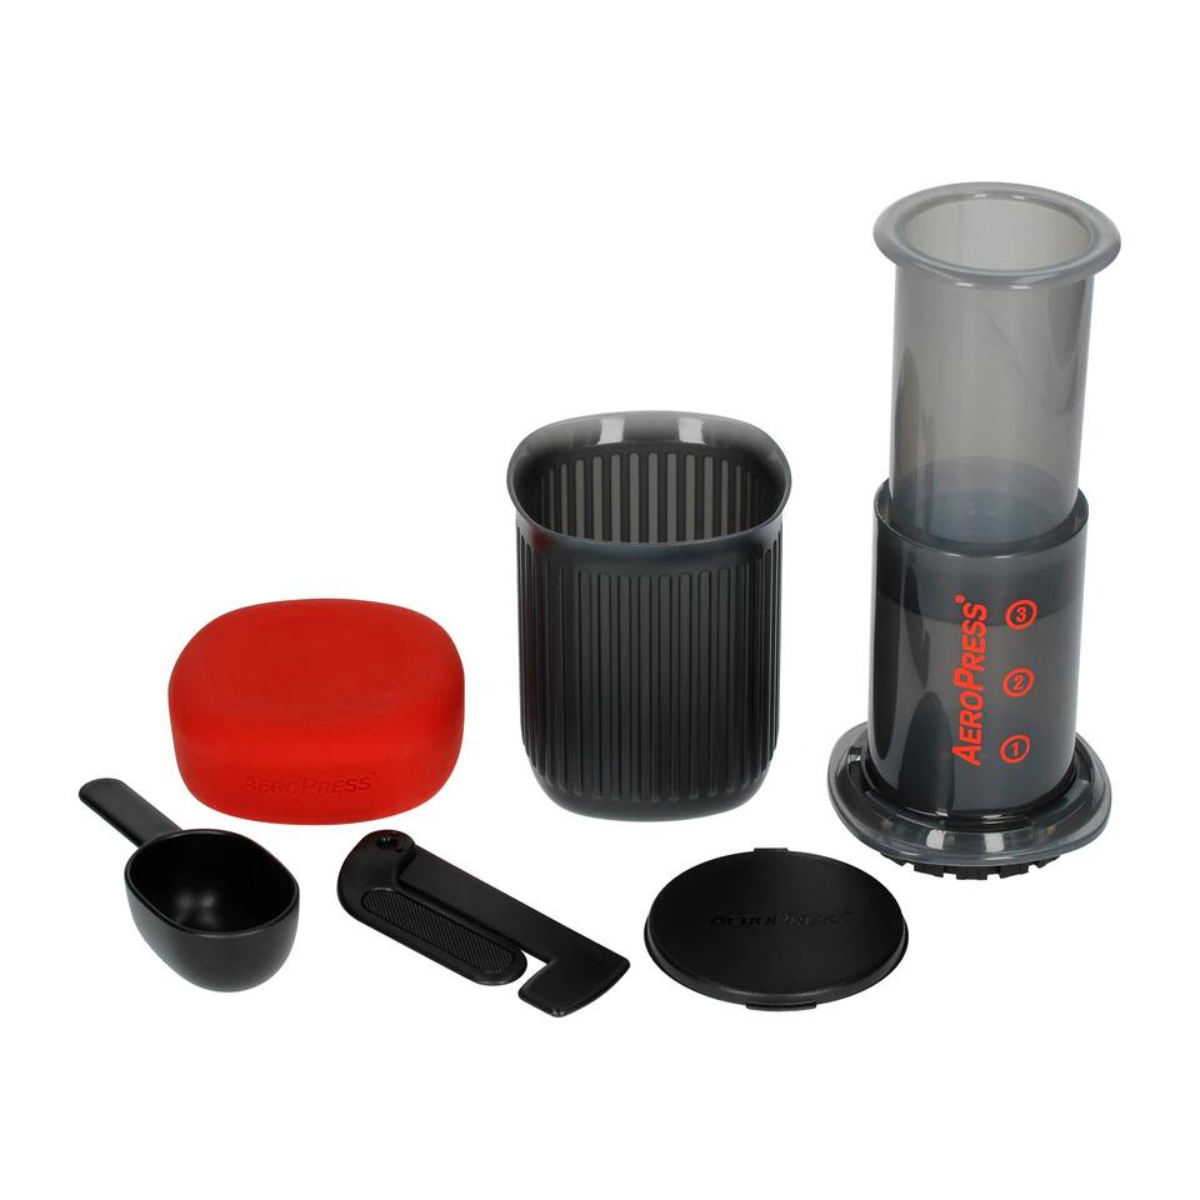 AeroPress GO Travel Coffee Maker with Metal Filter